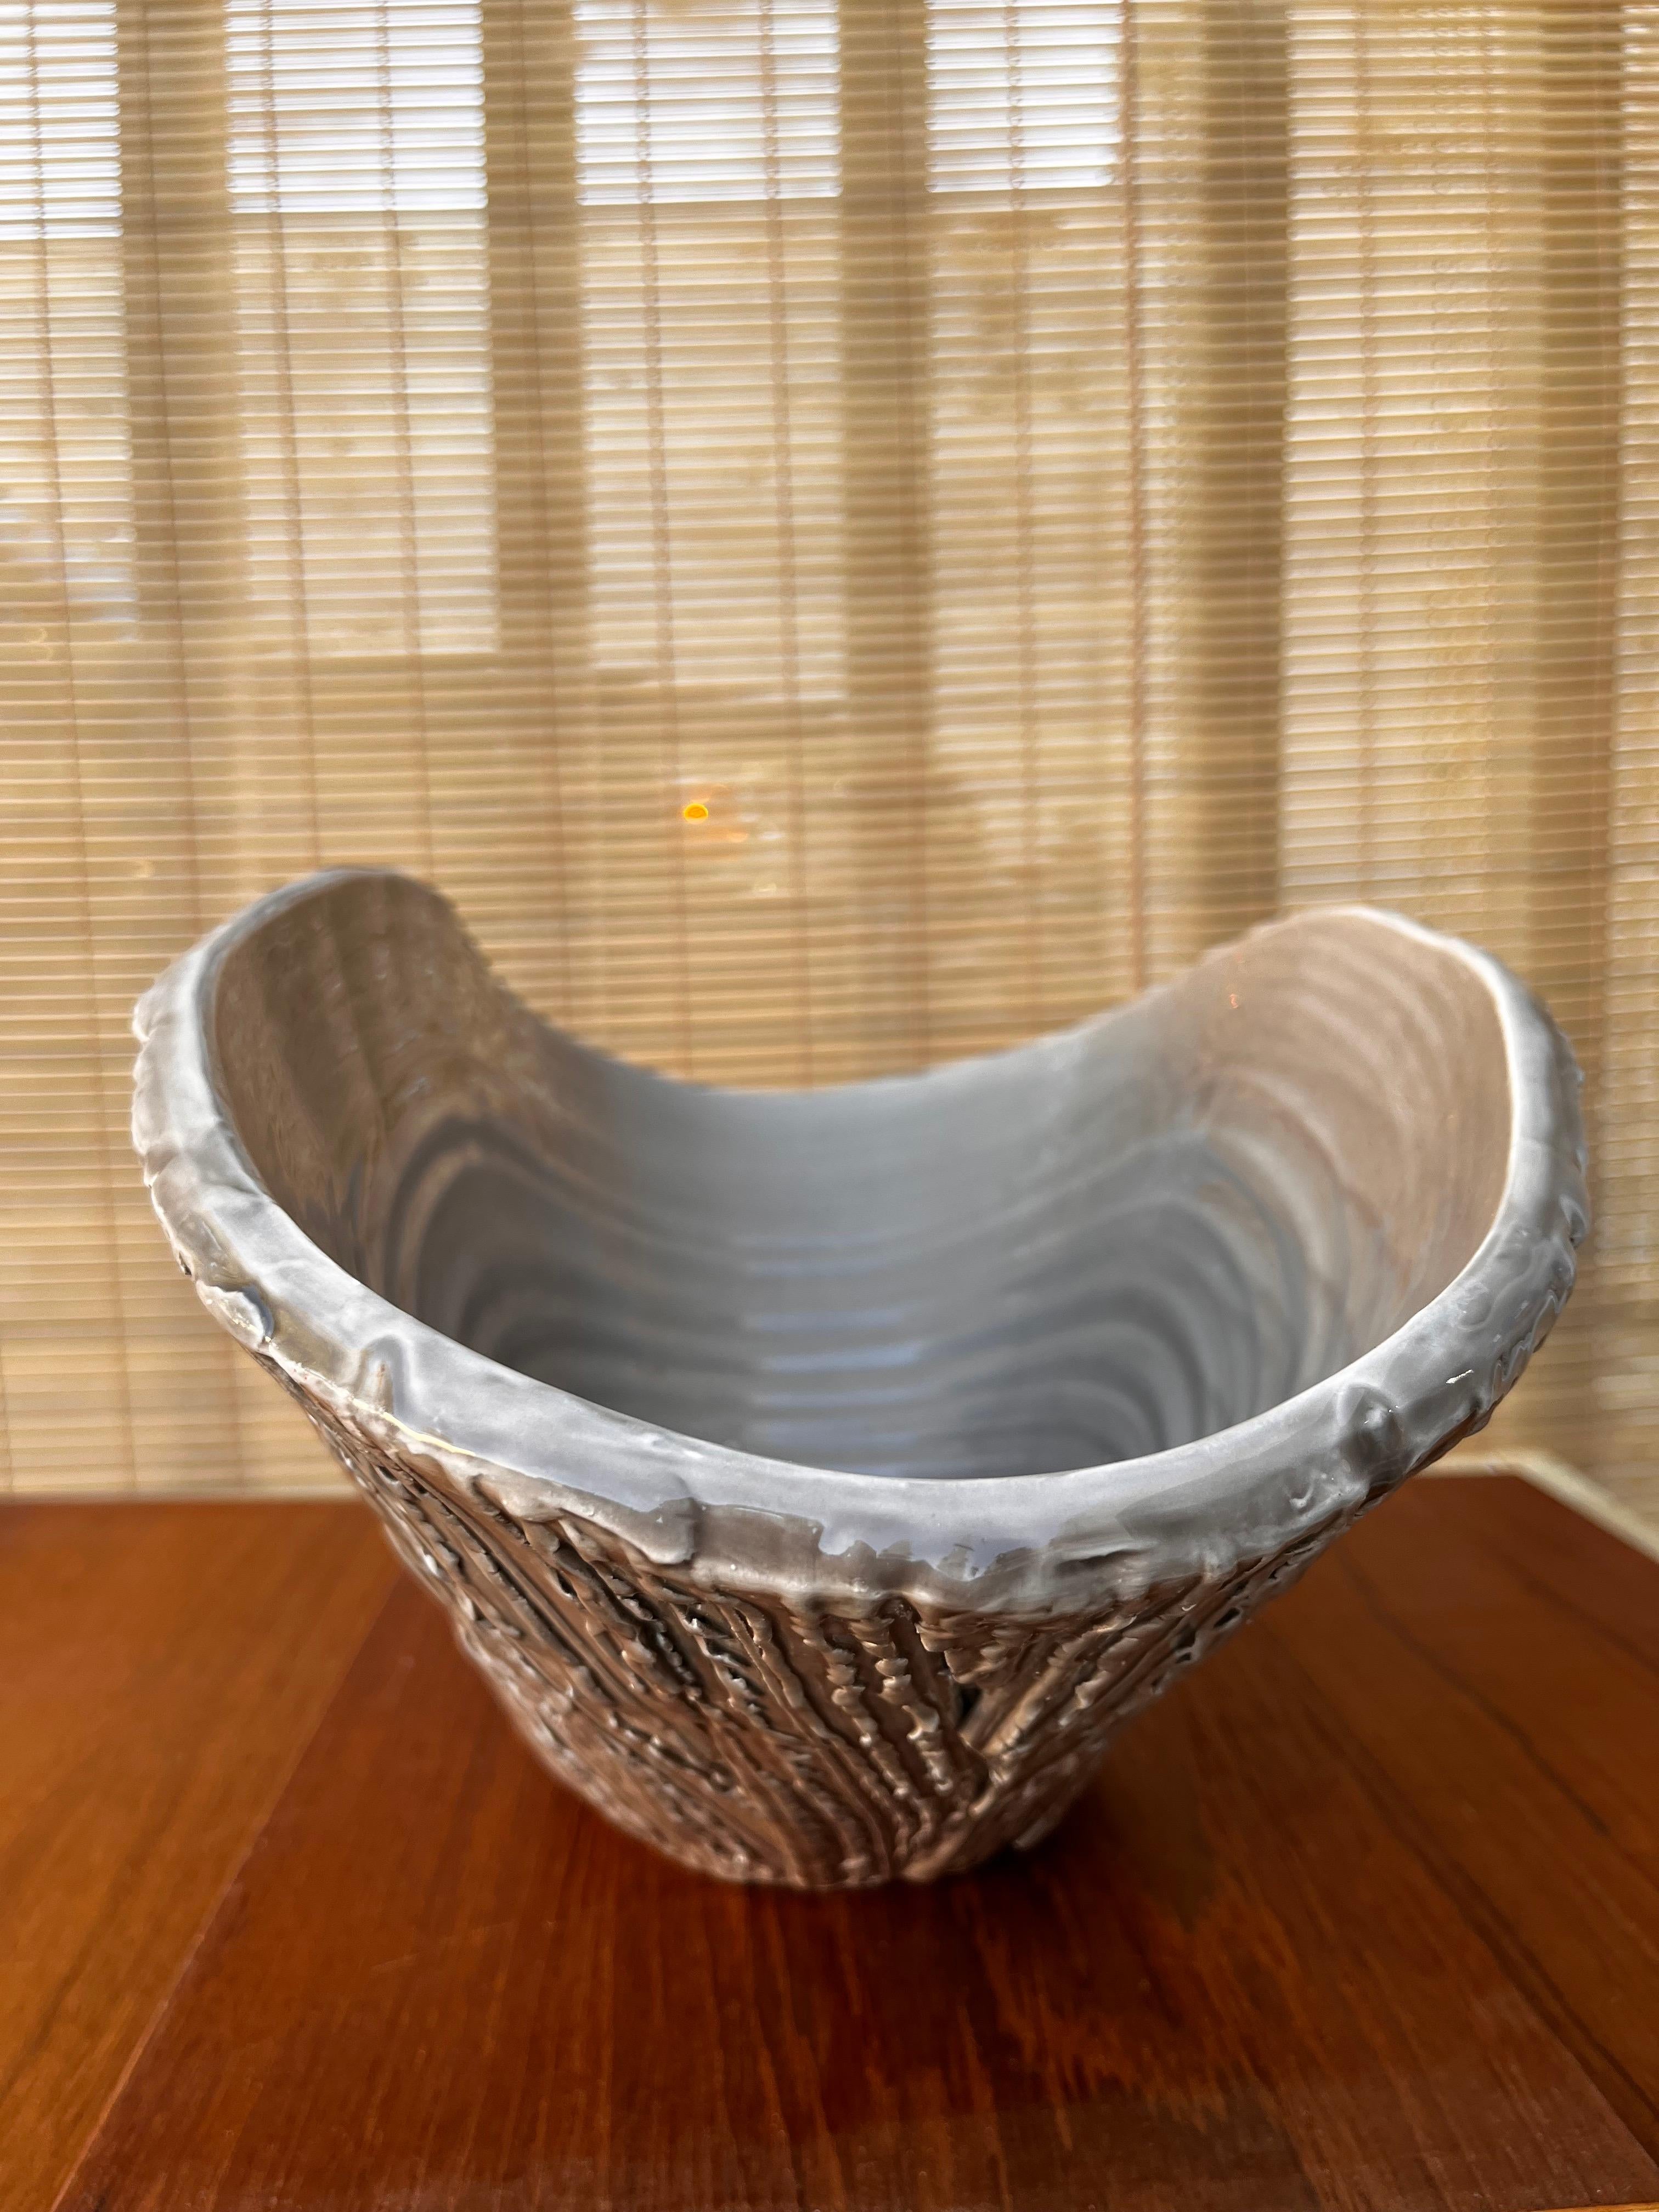 Large Early 21st Century Textured Ceramic Bowl / Centerpiece by Abigails, Italy For Sale 6